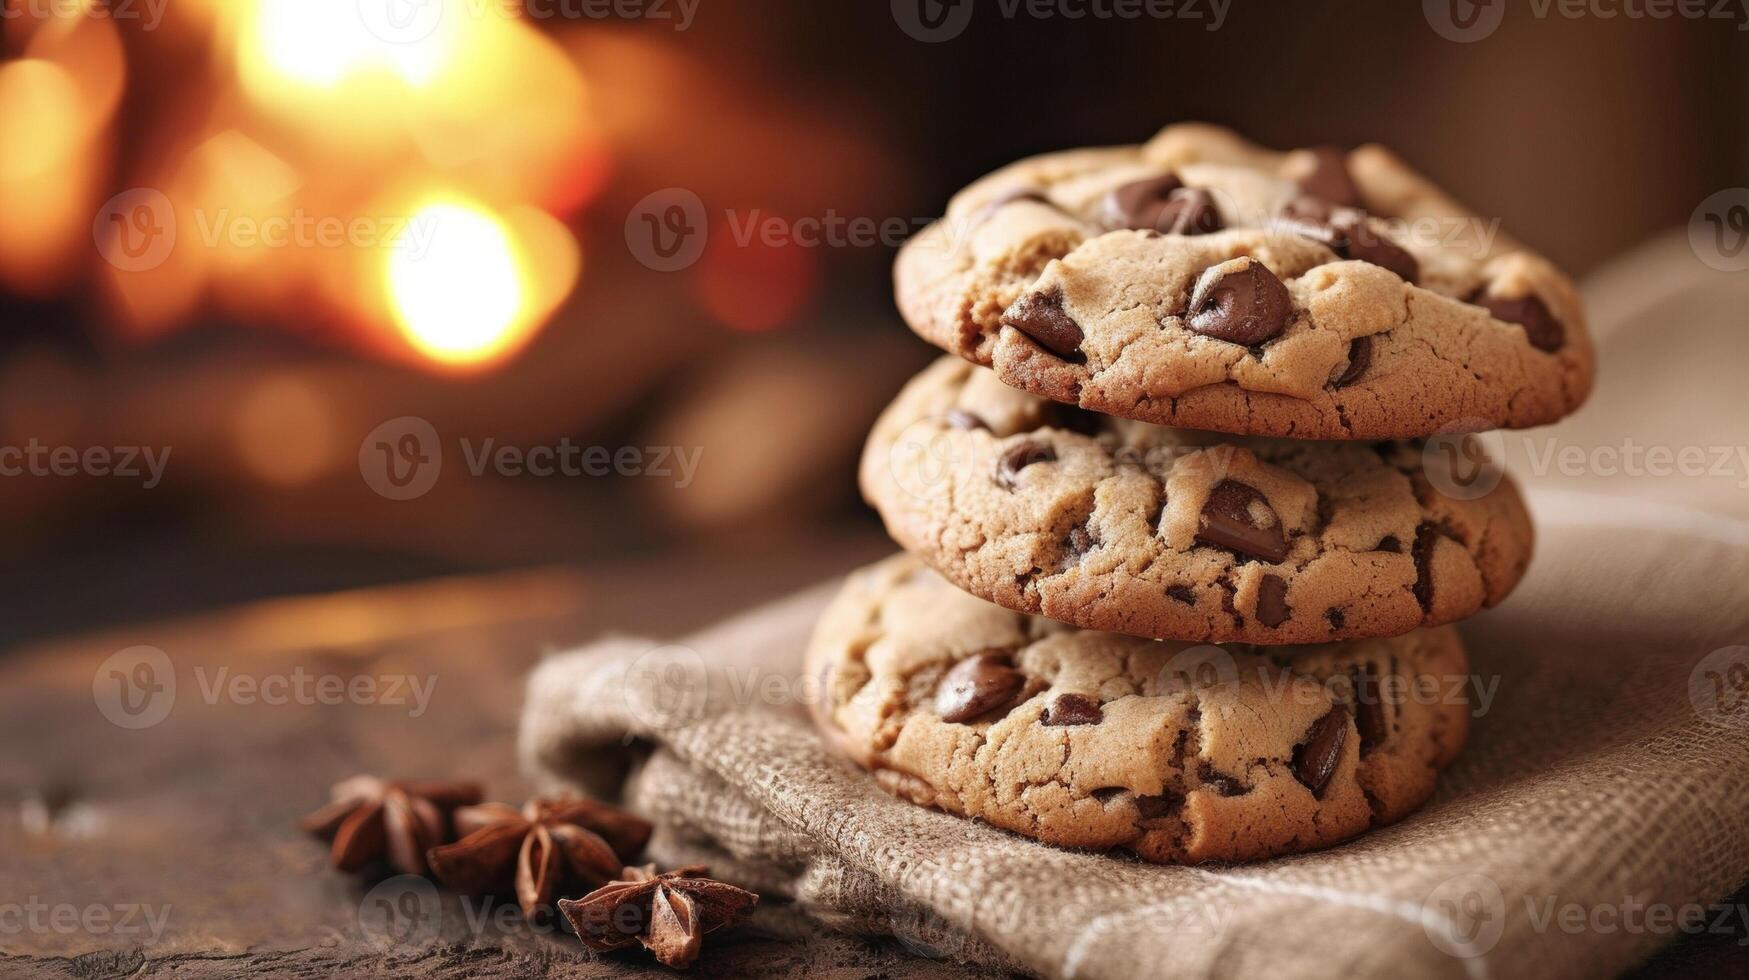 These cuddleworthy cookies are the perfect way to warm up on a chilly evening bite into the soft ery texture and taste the love in every bite while the fire roars in the background photo